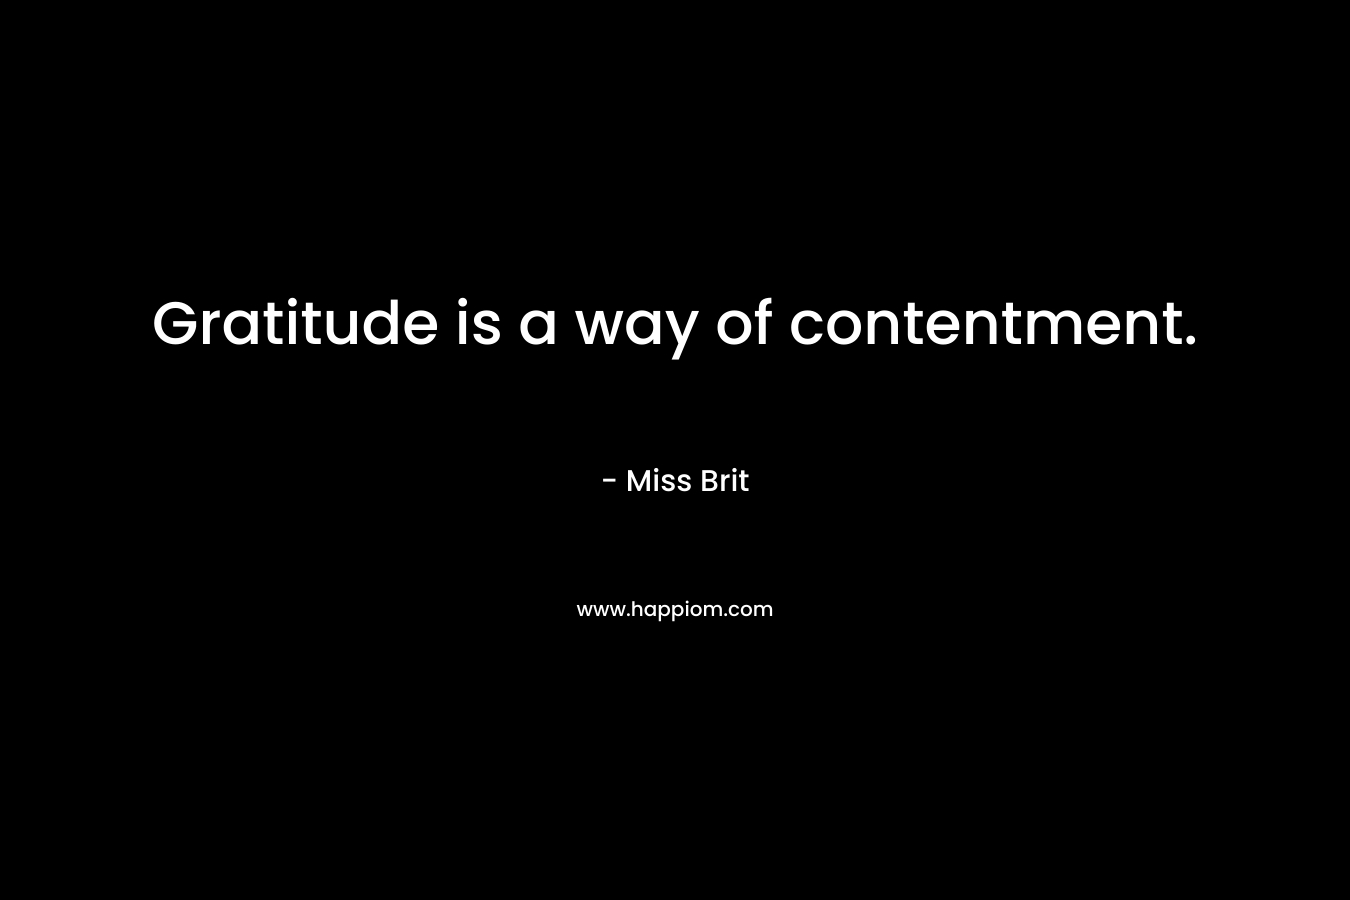 Gratitude is a way of contentment.